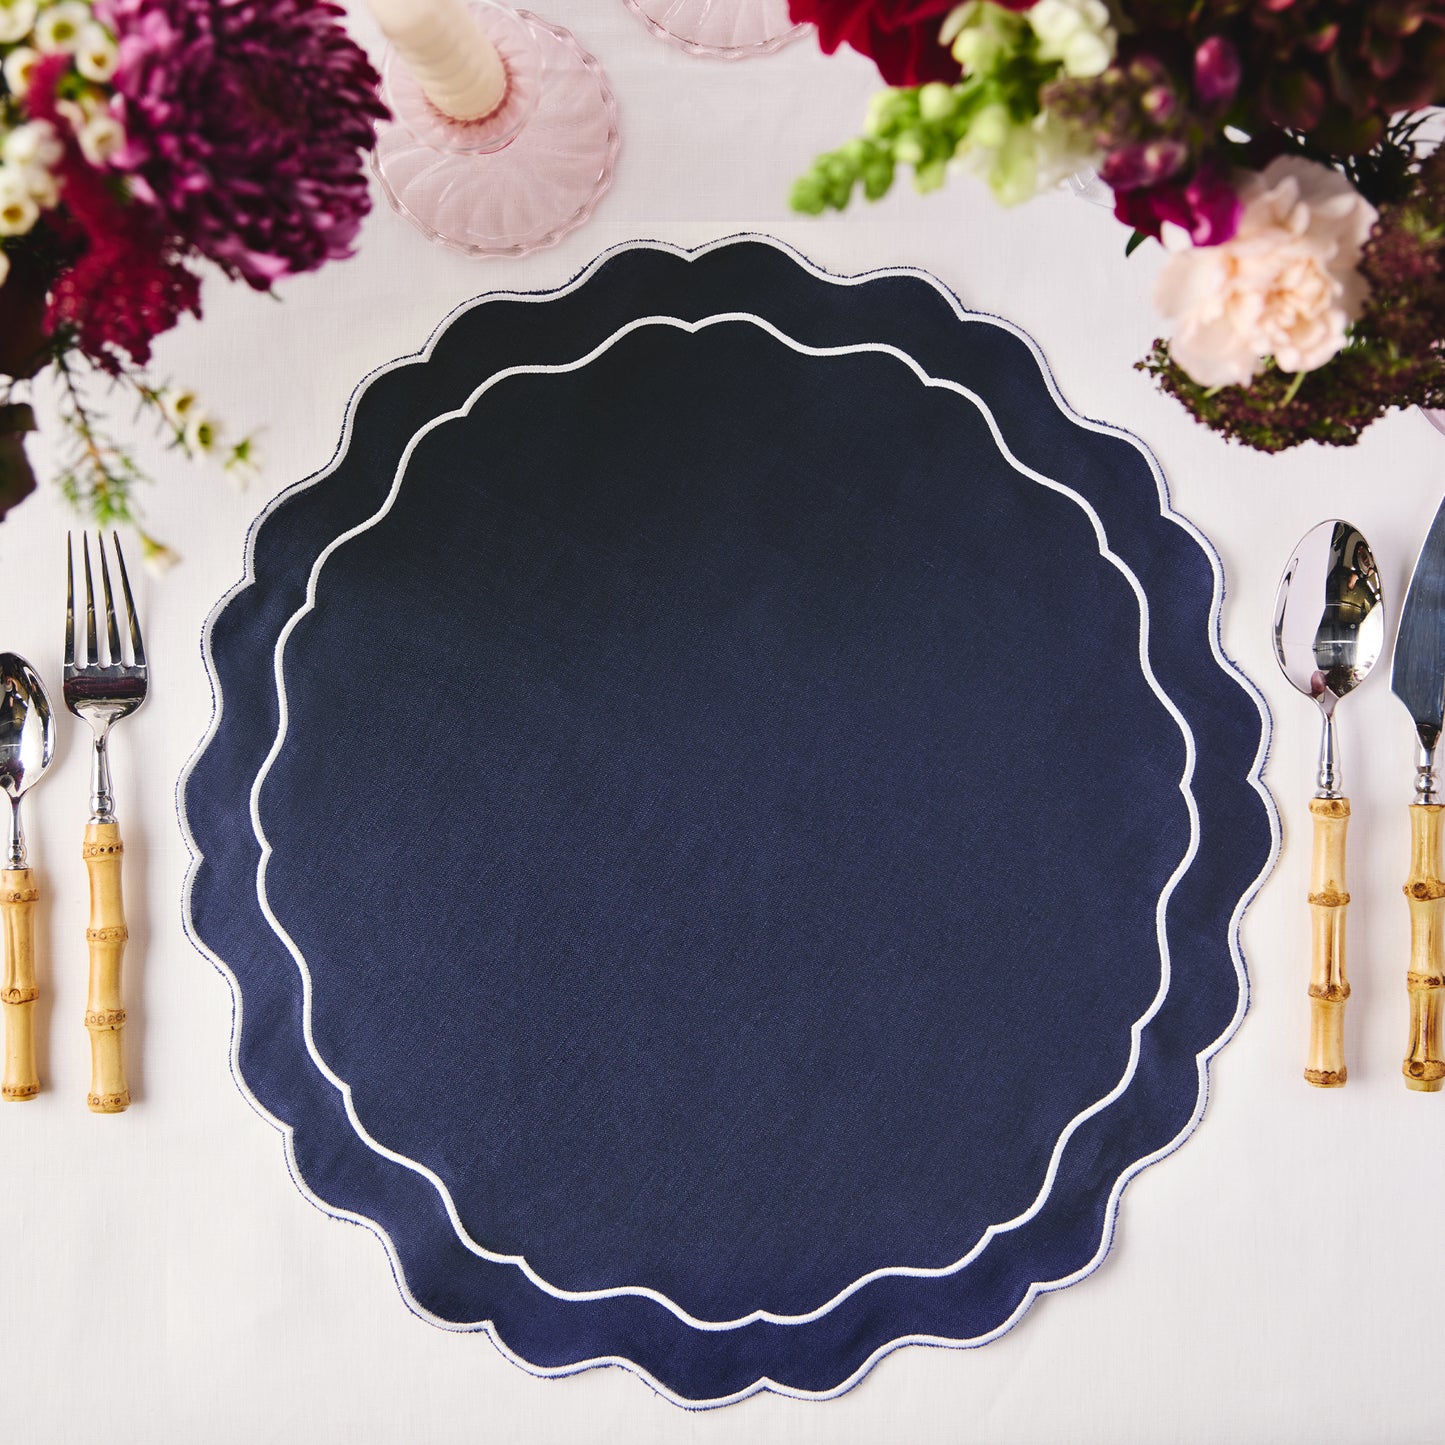 Set of 4 - Linen Scalloped Edged Placemats - Oxford Blue